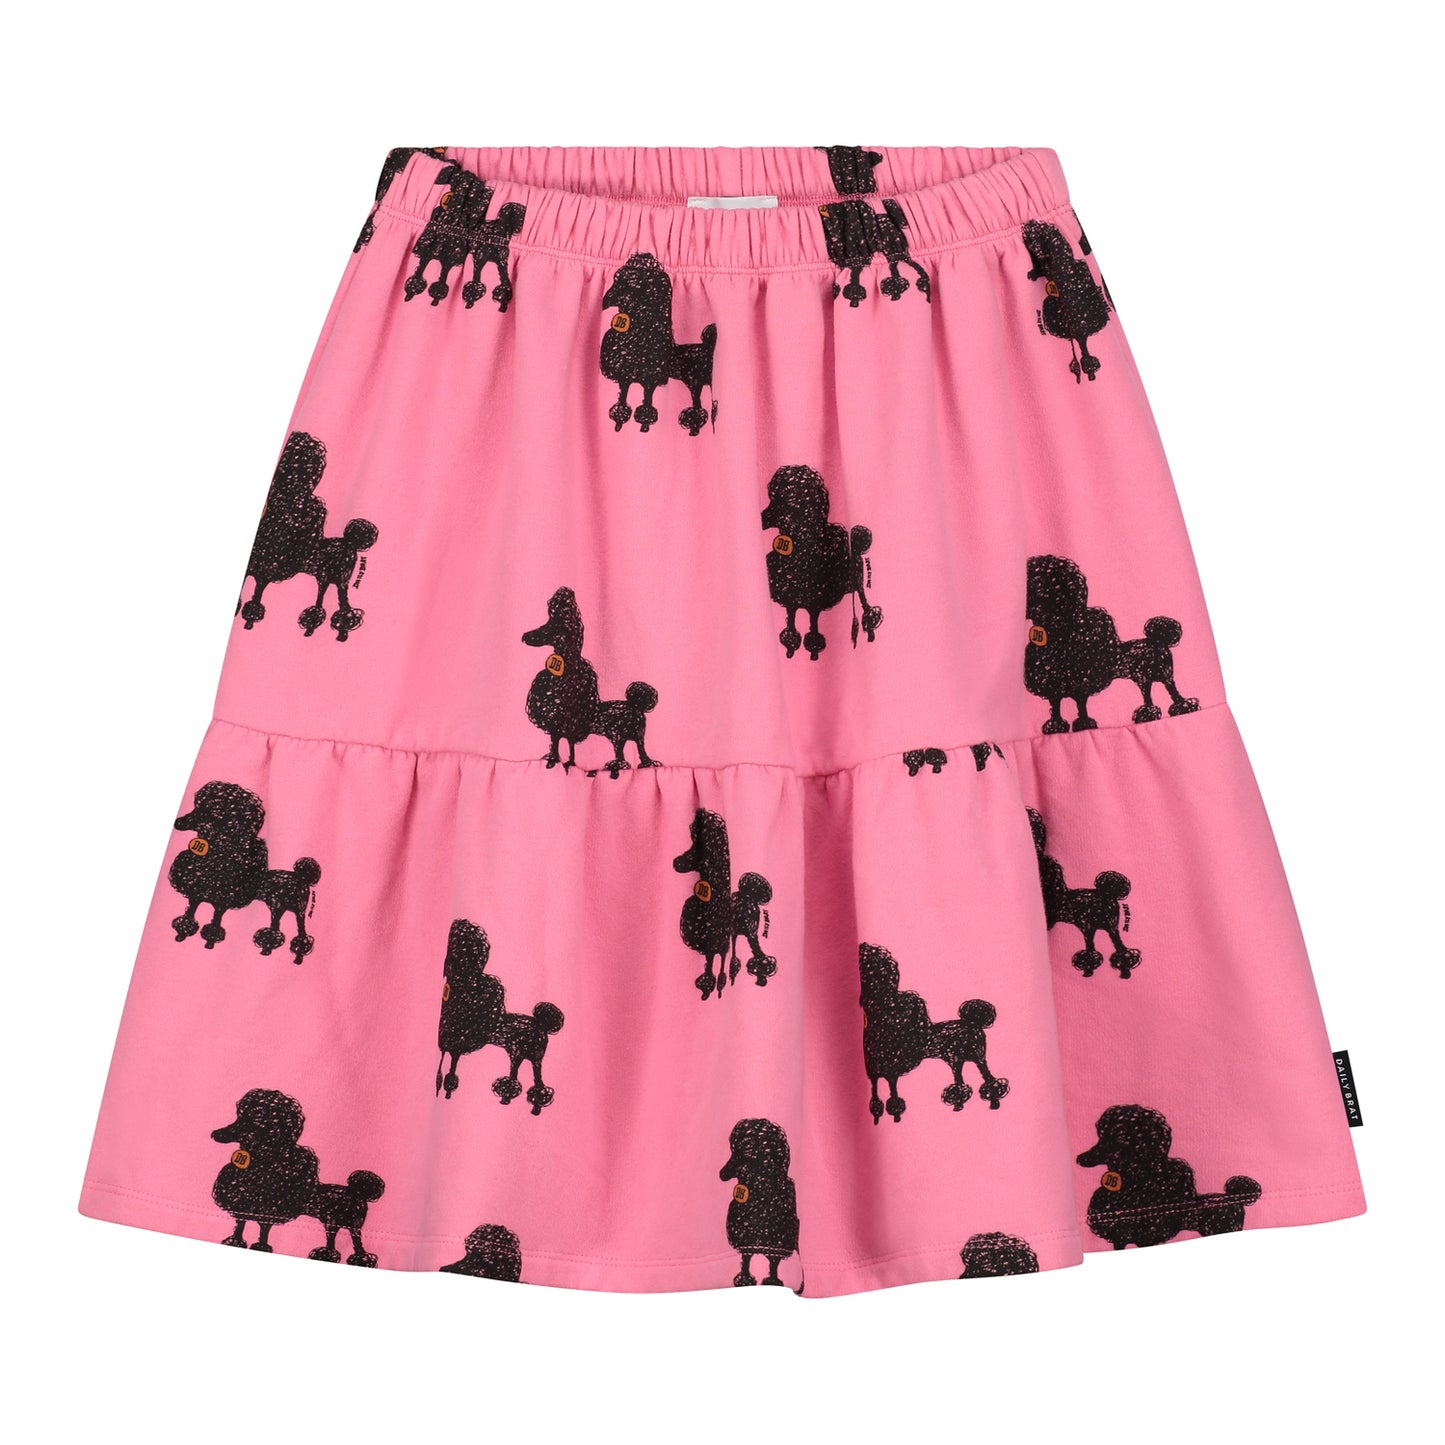 Daily brat - Poodle skirt chateau pink